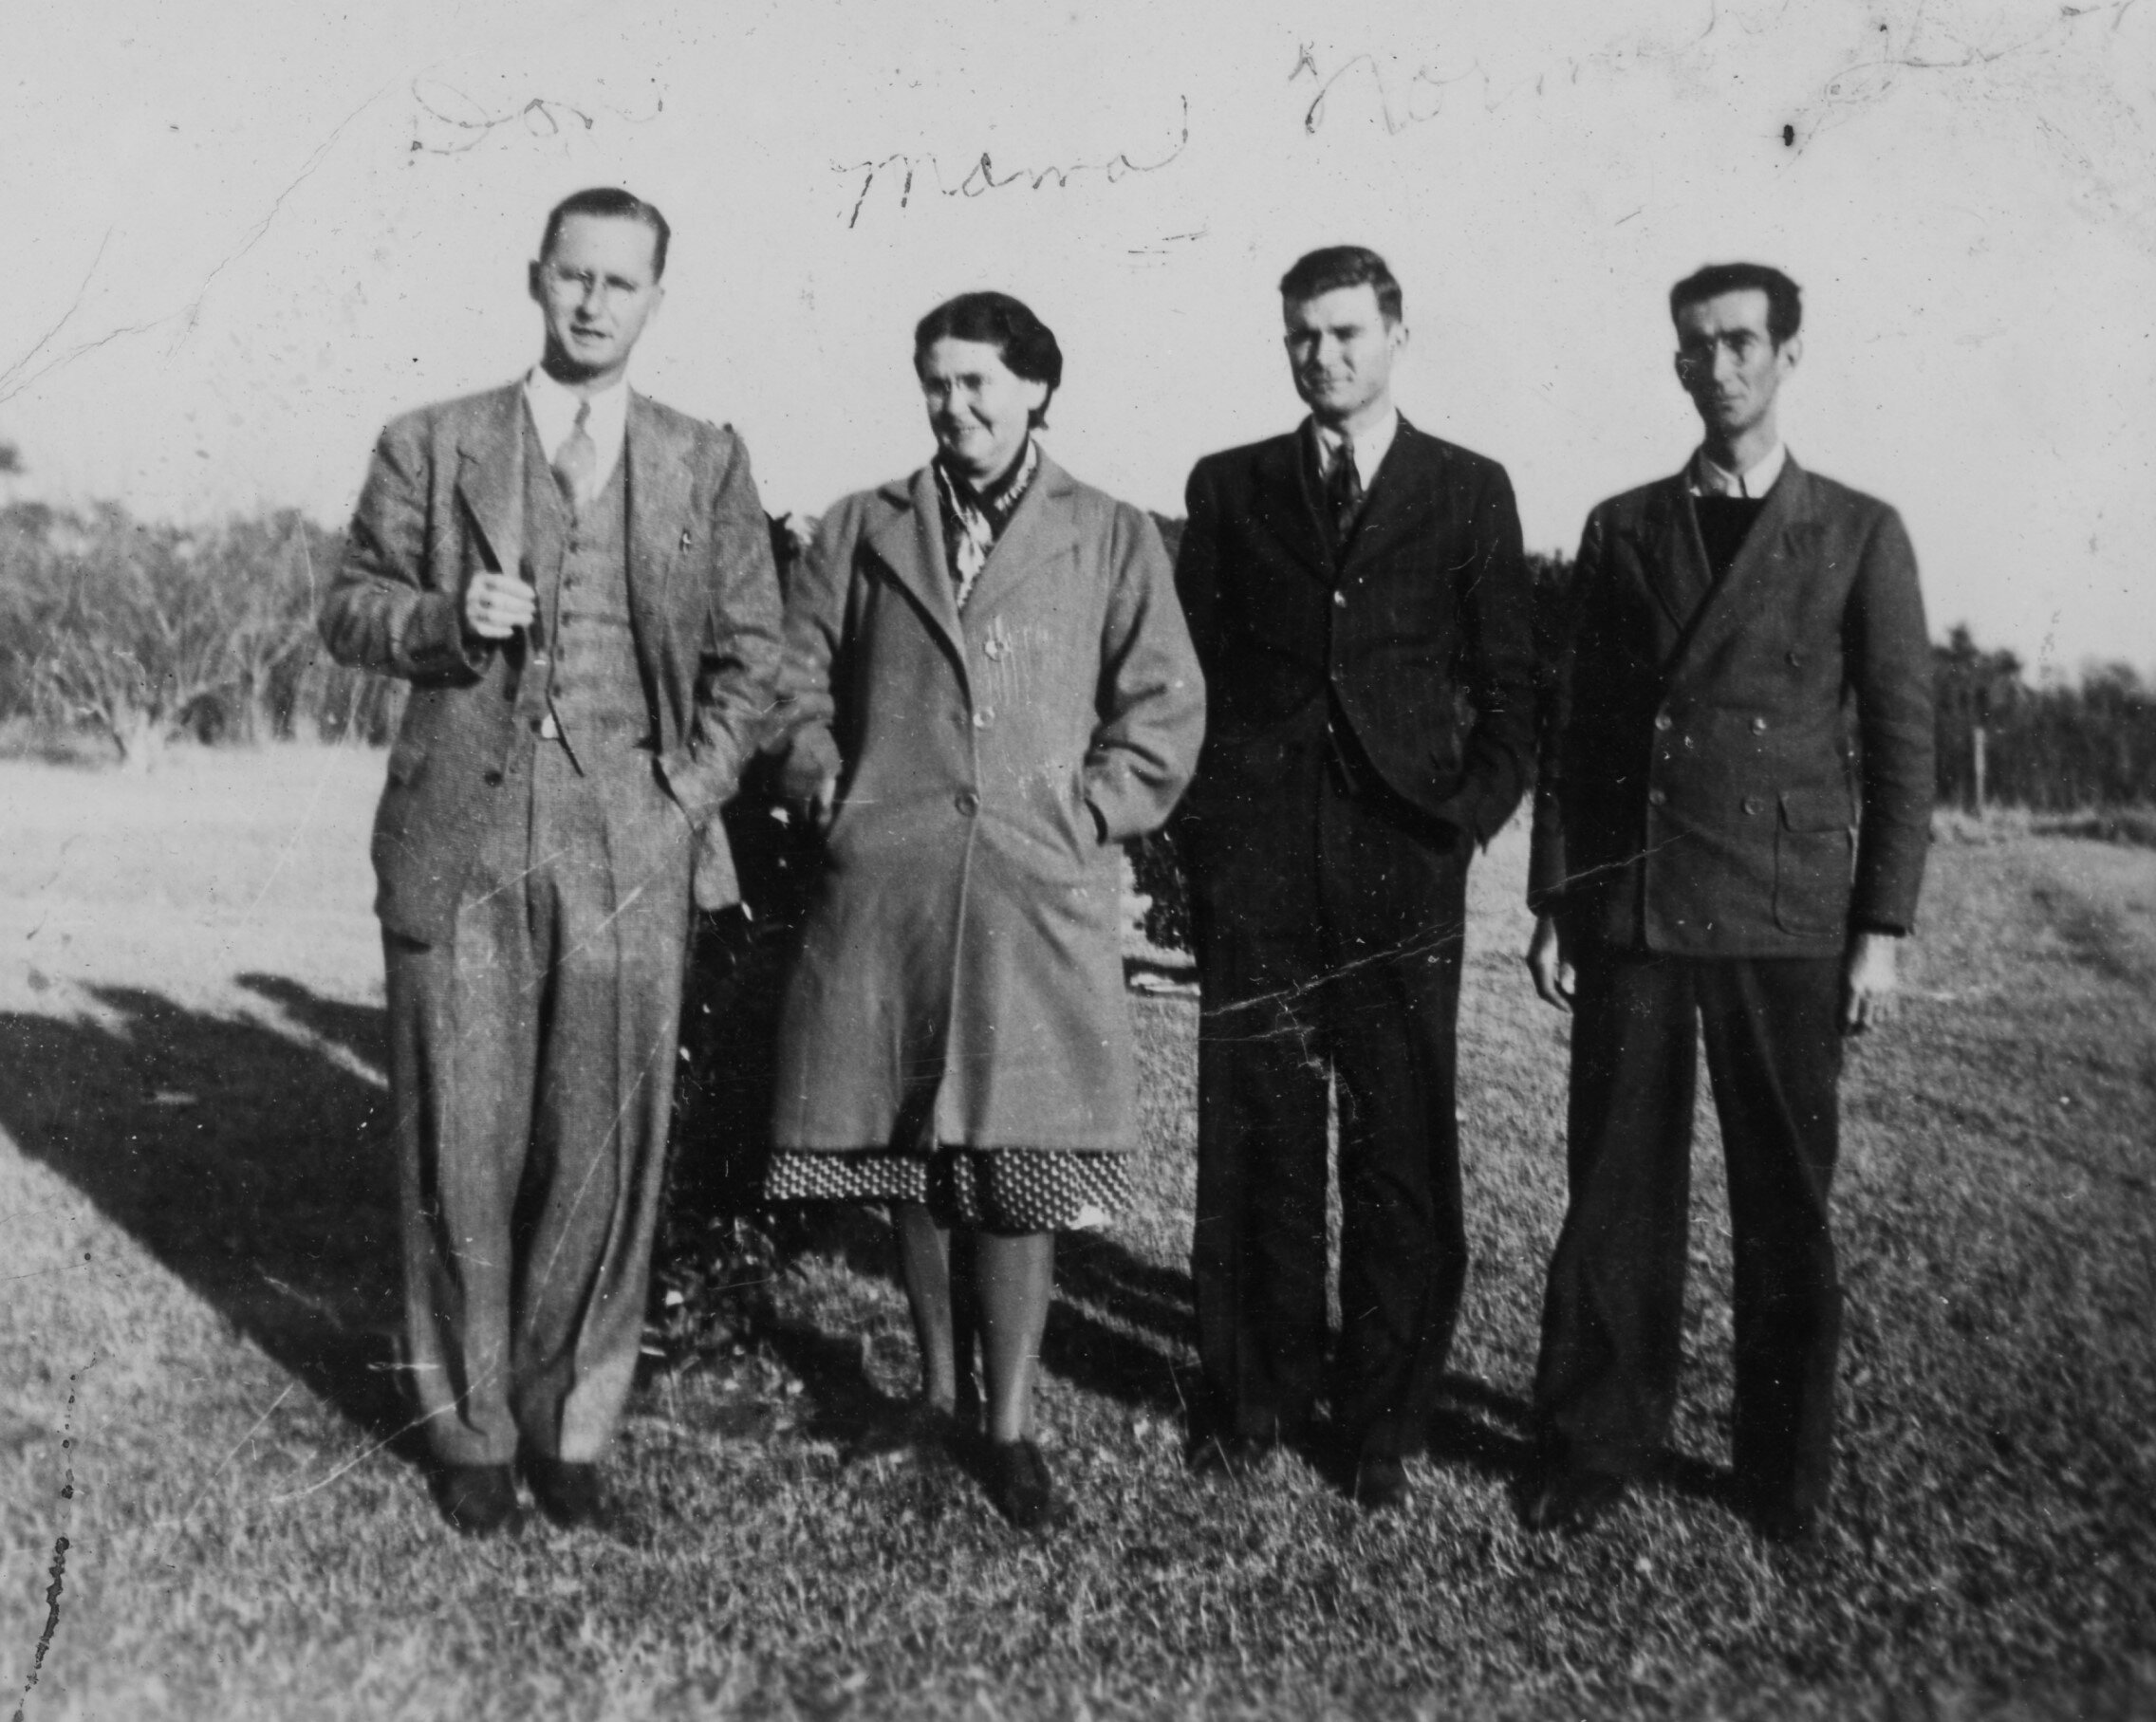 Donald Chadwick, Myrtle Chadwick, Norman Chadwick, Leon Chadwick Myrtle Chadwick–mother pictured with her three sons. Father was Guy Chadwick, not pictured)